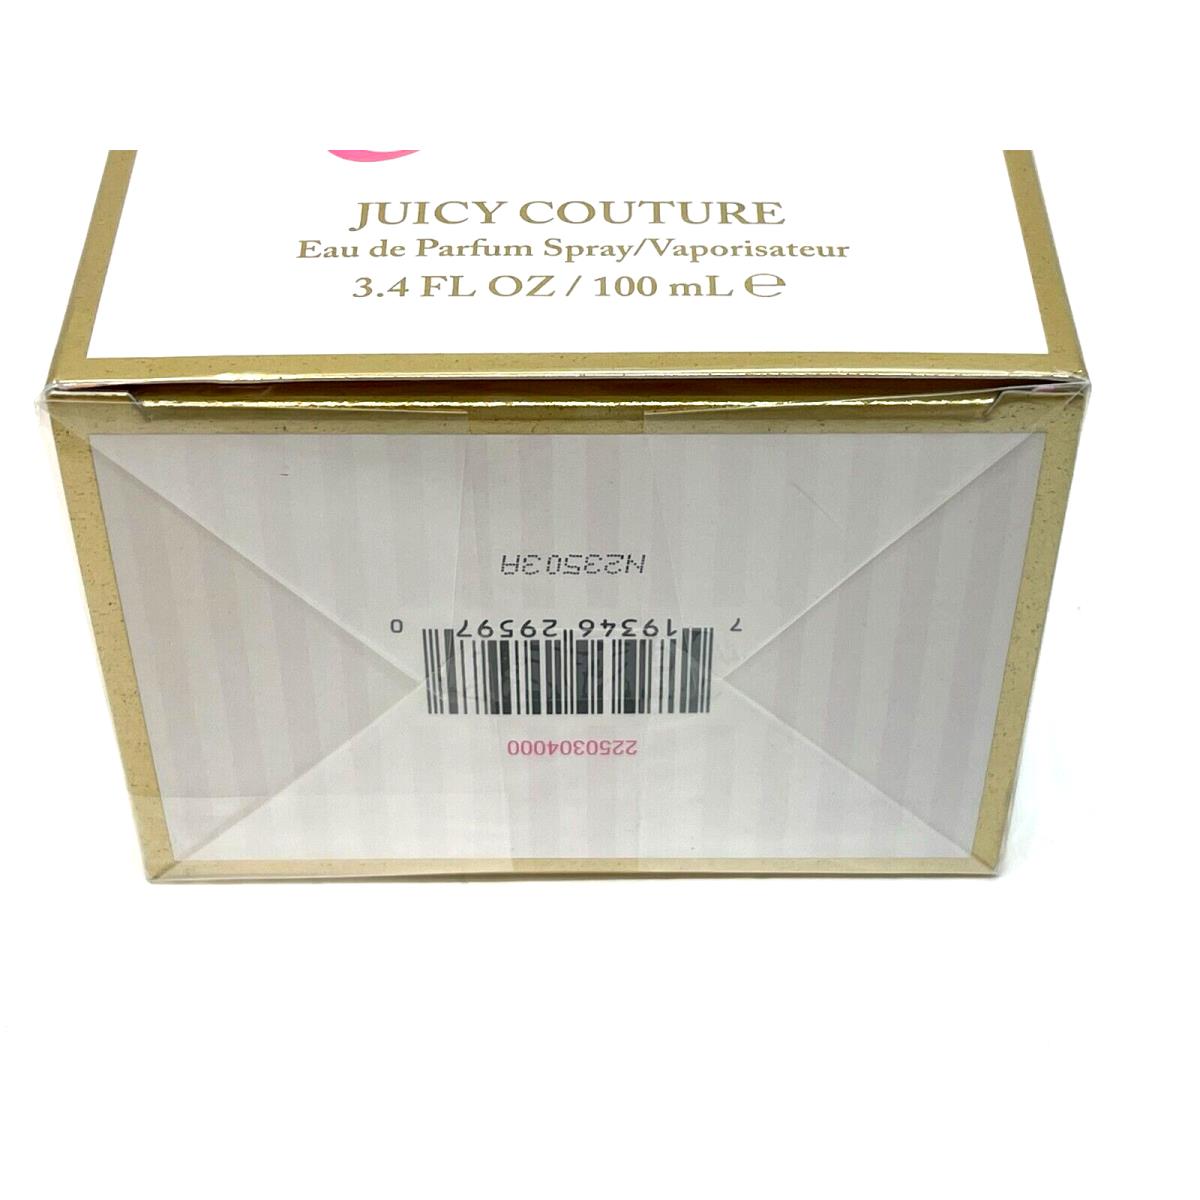 Juicy Couture perfume,cologne,fragrance,parfum NOT